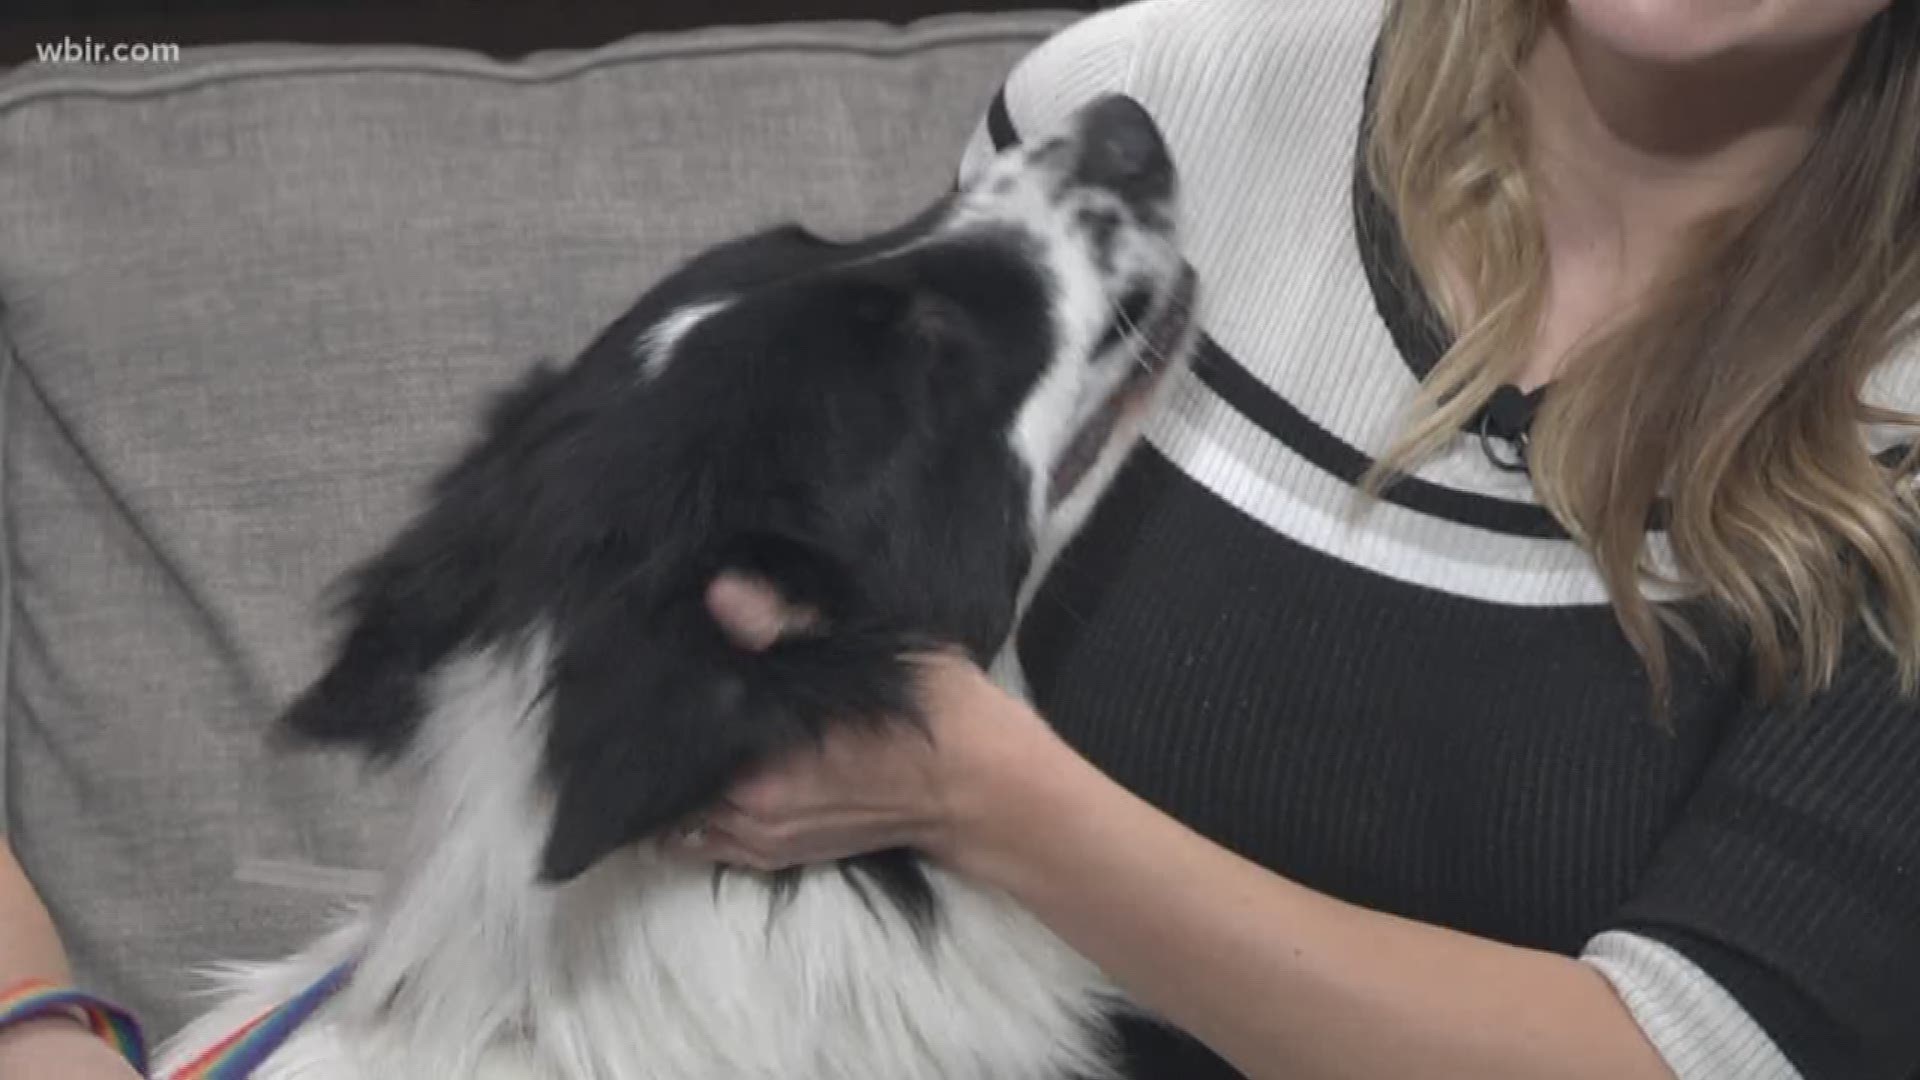 Young-Williams Animal Center shares tips to keep your dog safe during the cold winter weather.